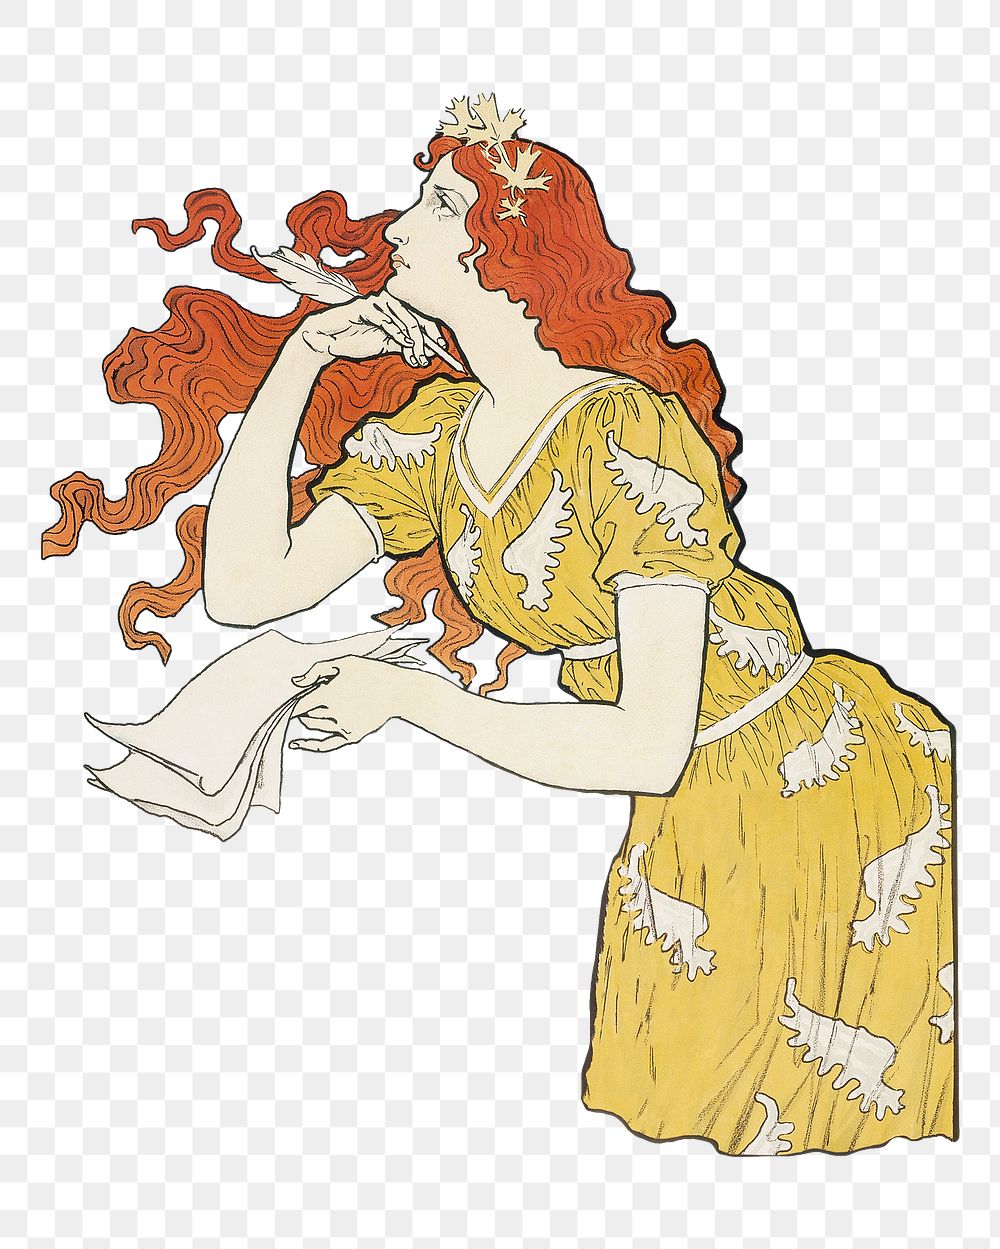 PNG Woman in yellow dress, vintage illustration by Eugene Samuel Grasset, transparent background. Remixed by rawpixel.